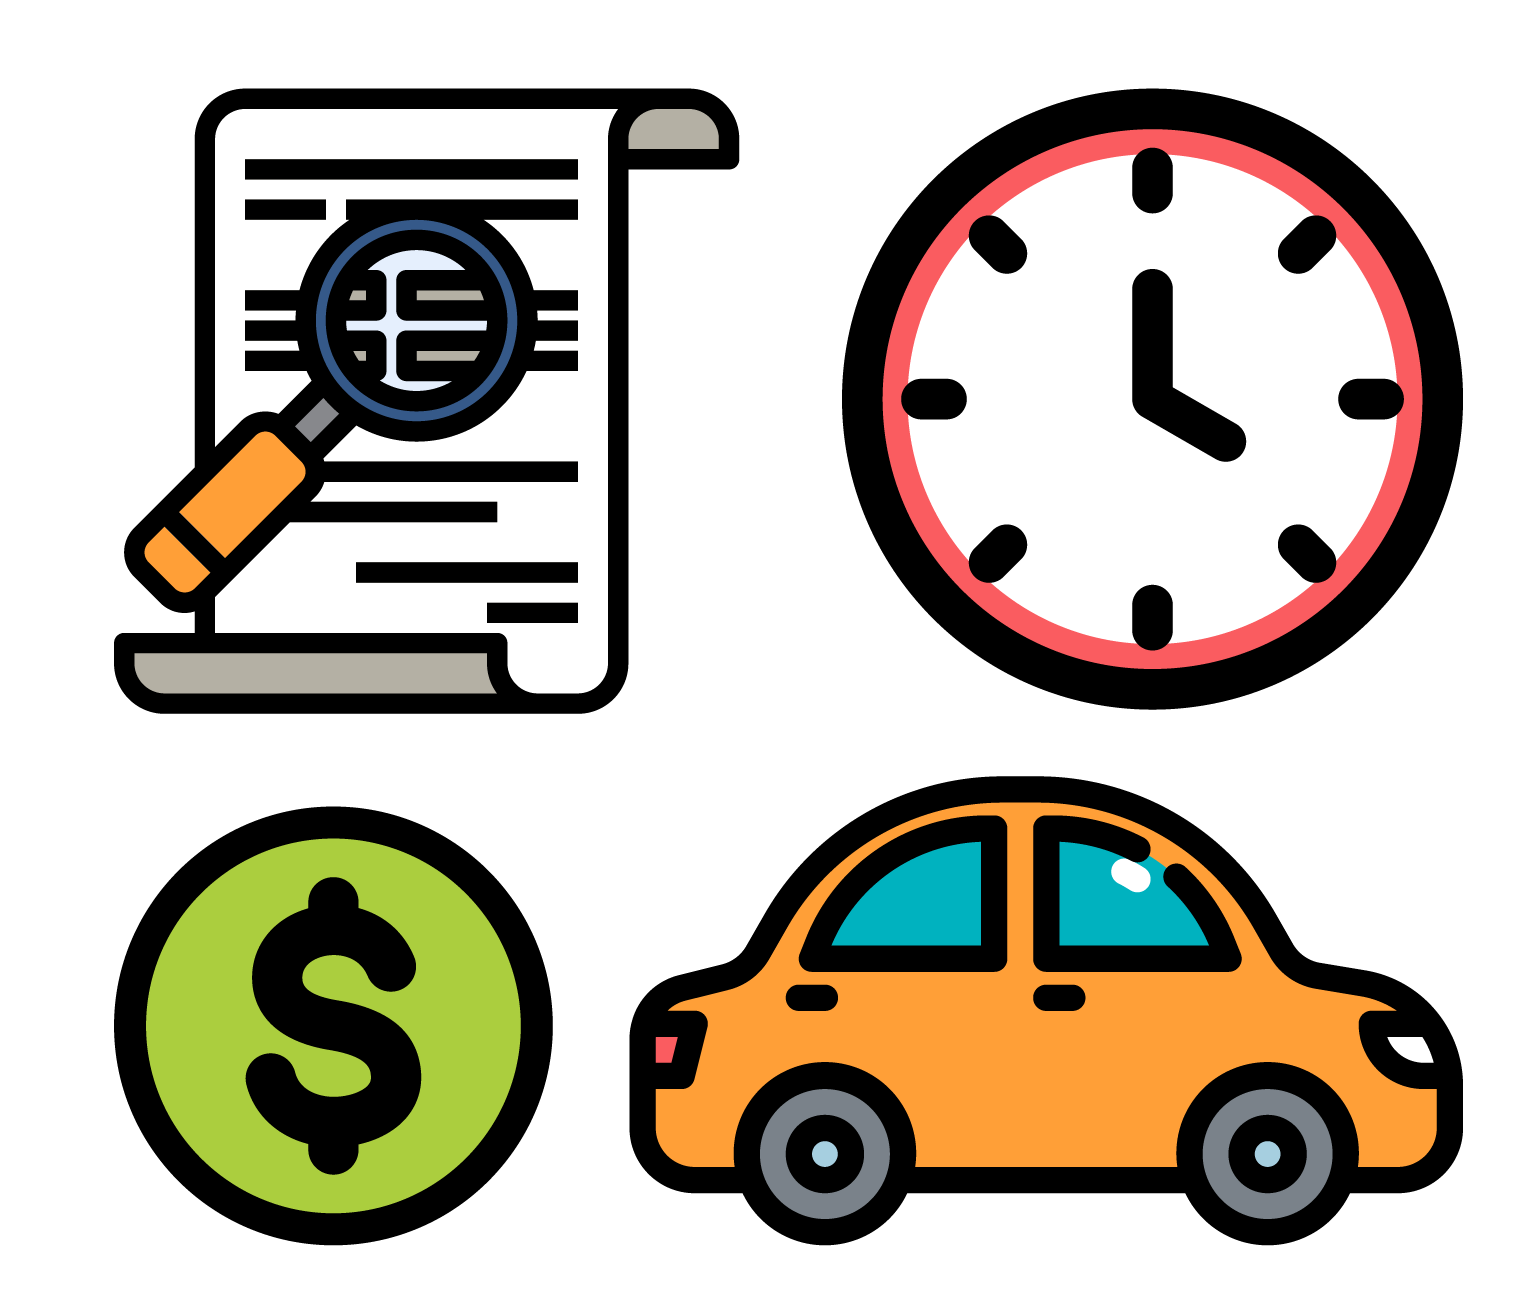 icon of magnifying glass over a piece of paper next to a clock, a dollar sign, and a car